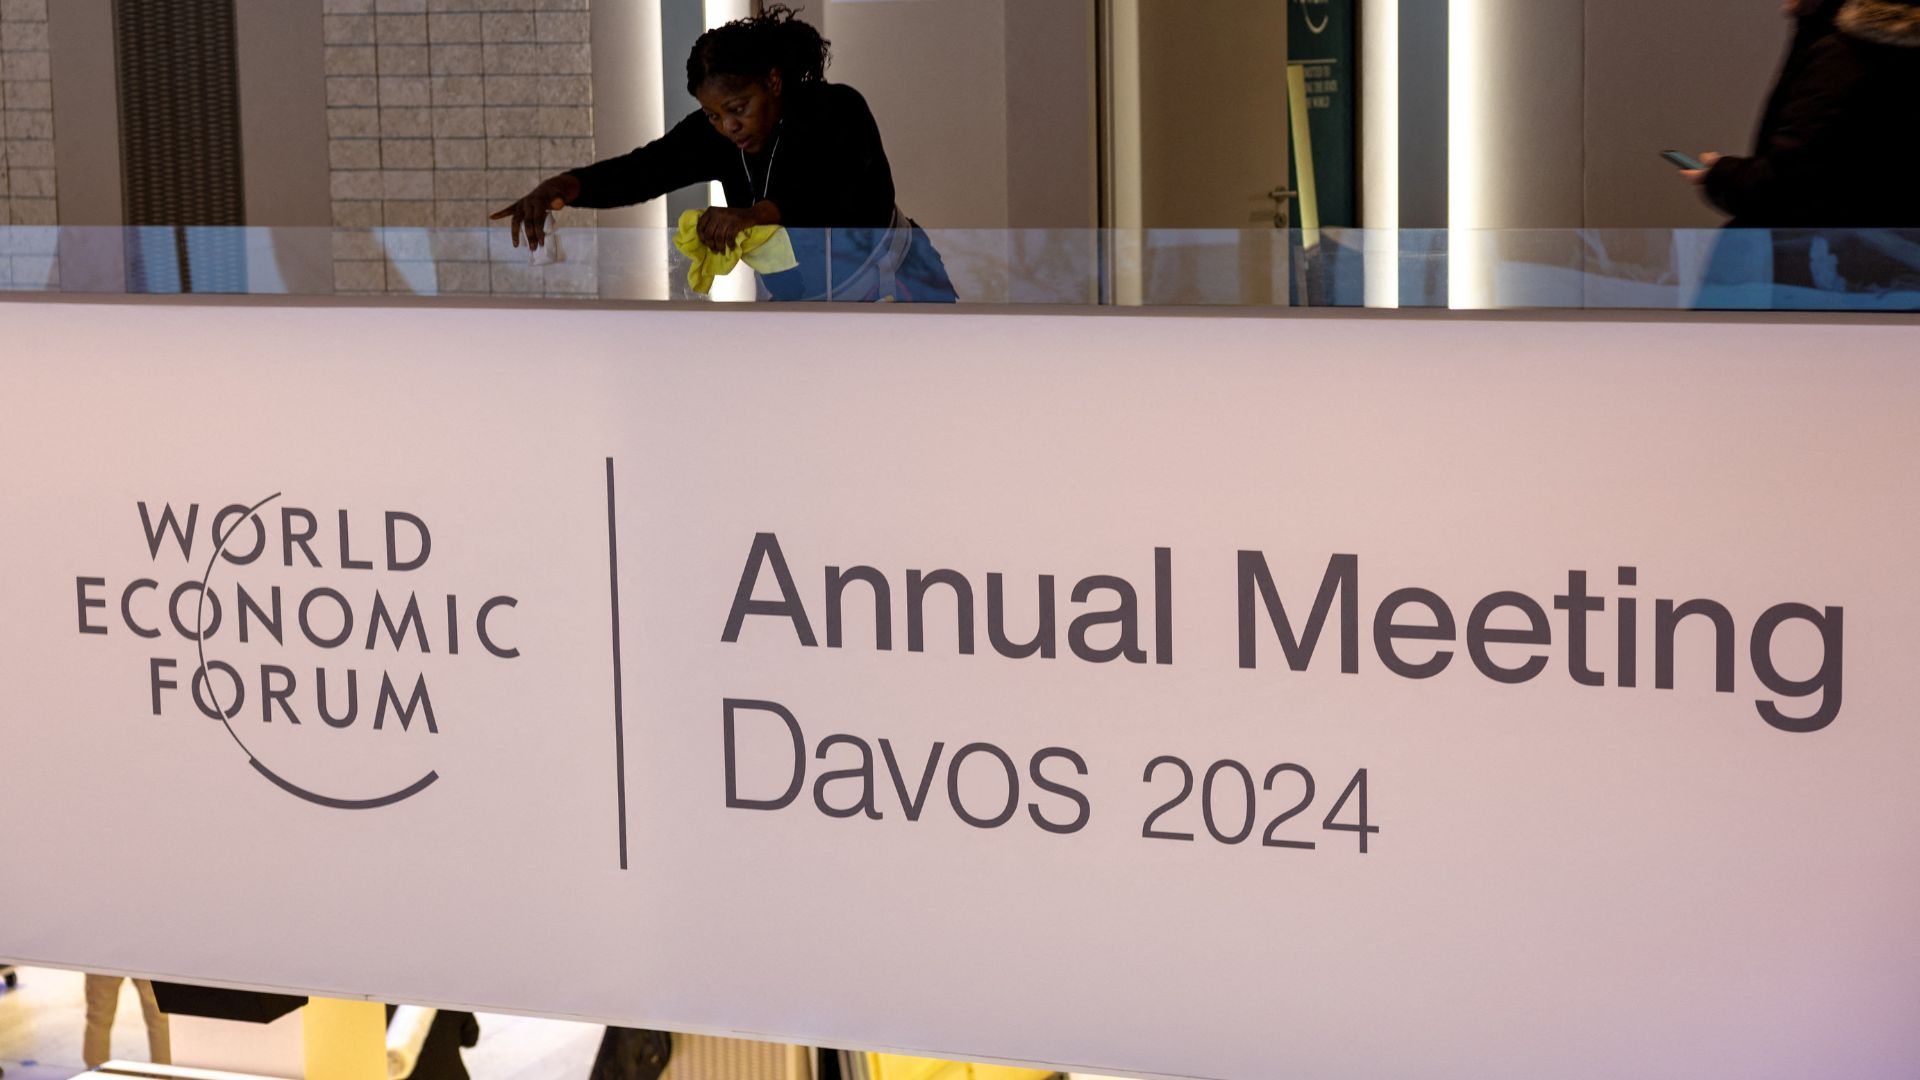 Preparing the Congress Center ahead of the annual meeting of the World Economic Forum (WEF) in Davos. /Denis Balibouse/Reuters